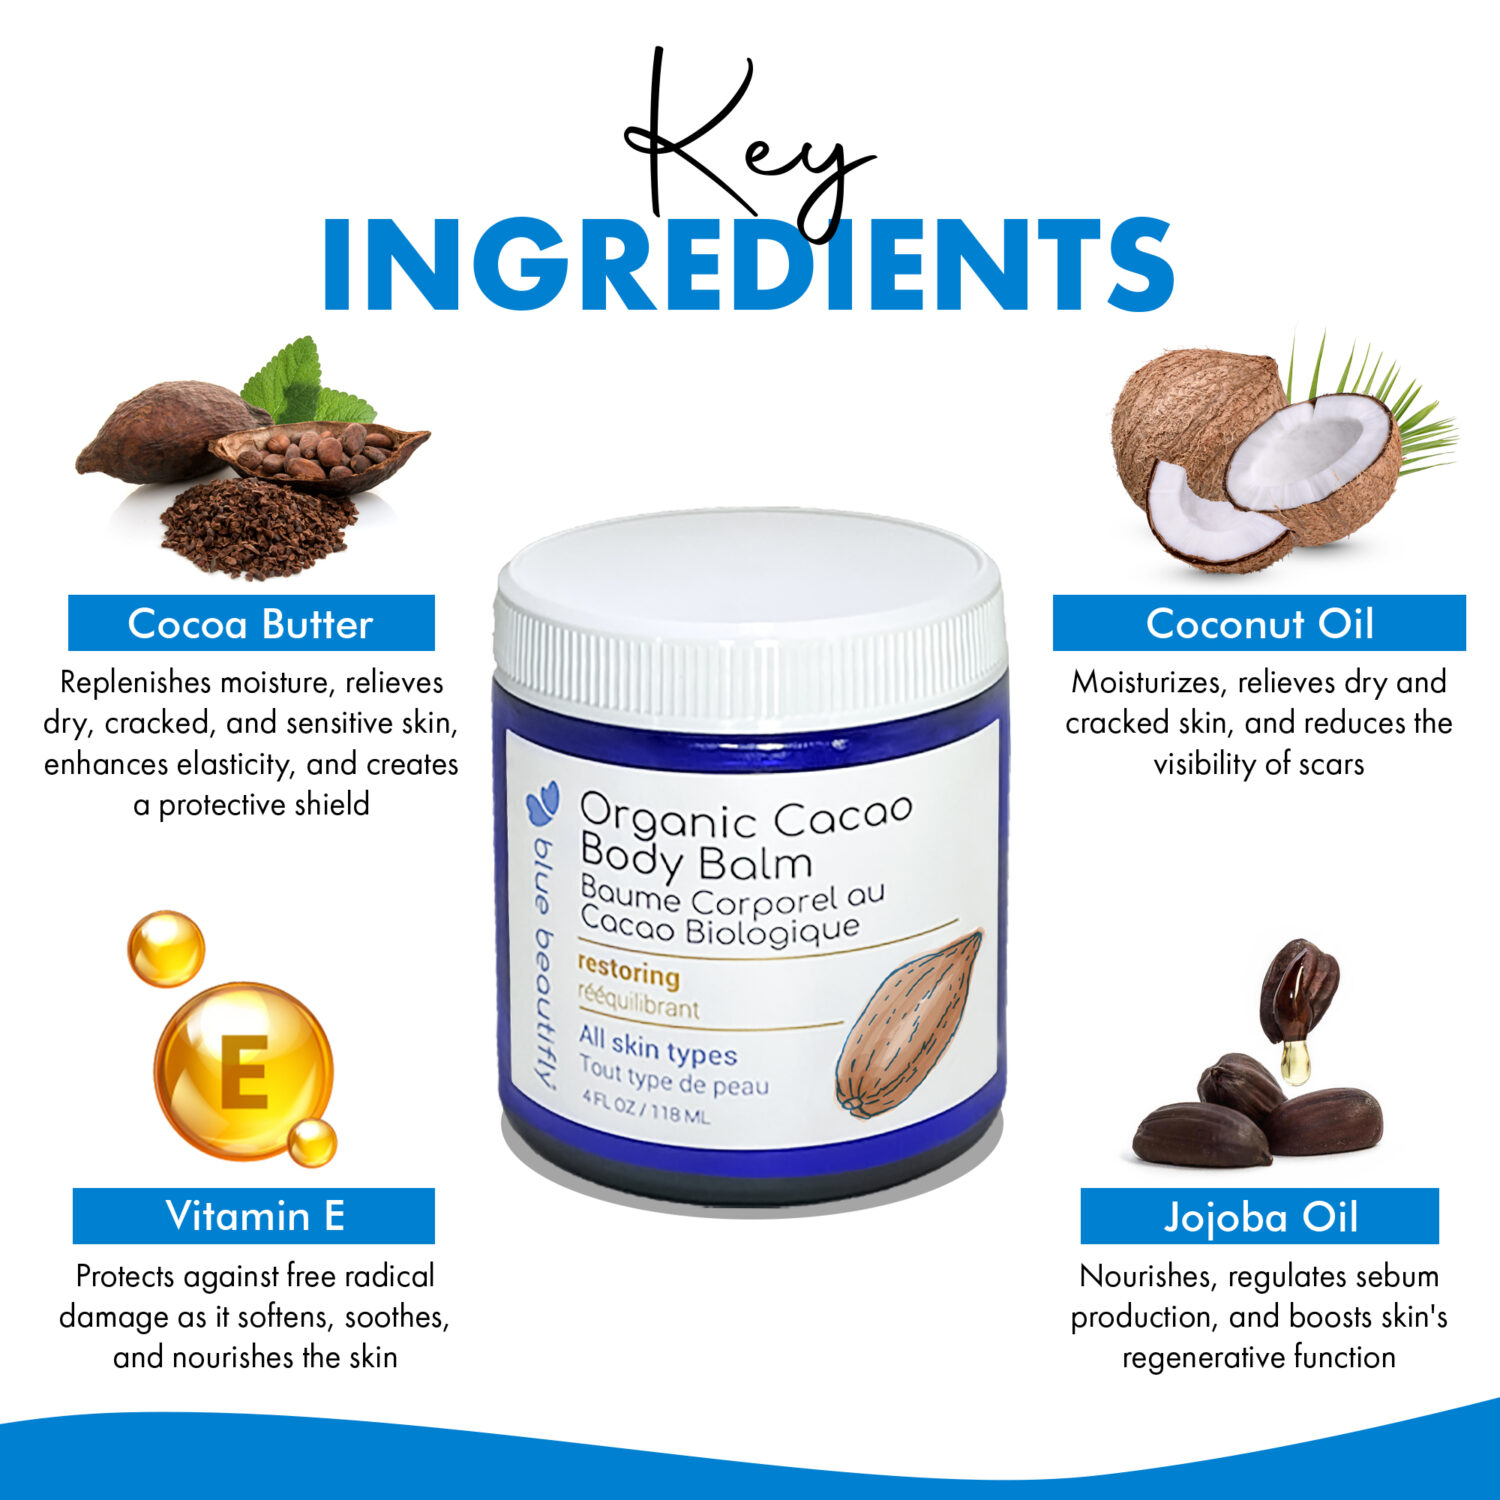 Blue Beautifly Organic Cacao Body Balm - Key ingredients are cocao butter, coconut oil, jojoba oil, and vitamin E